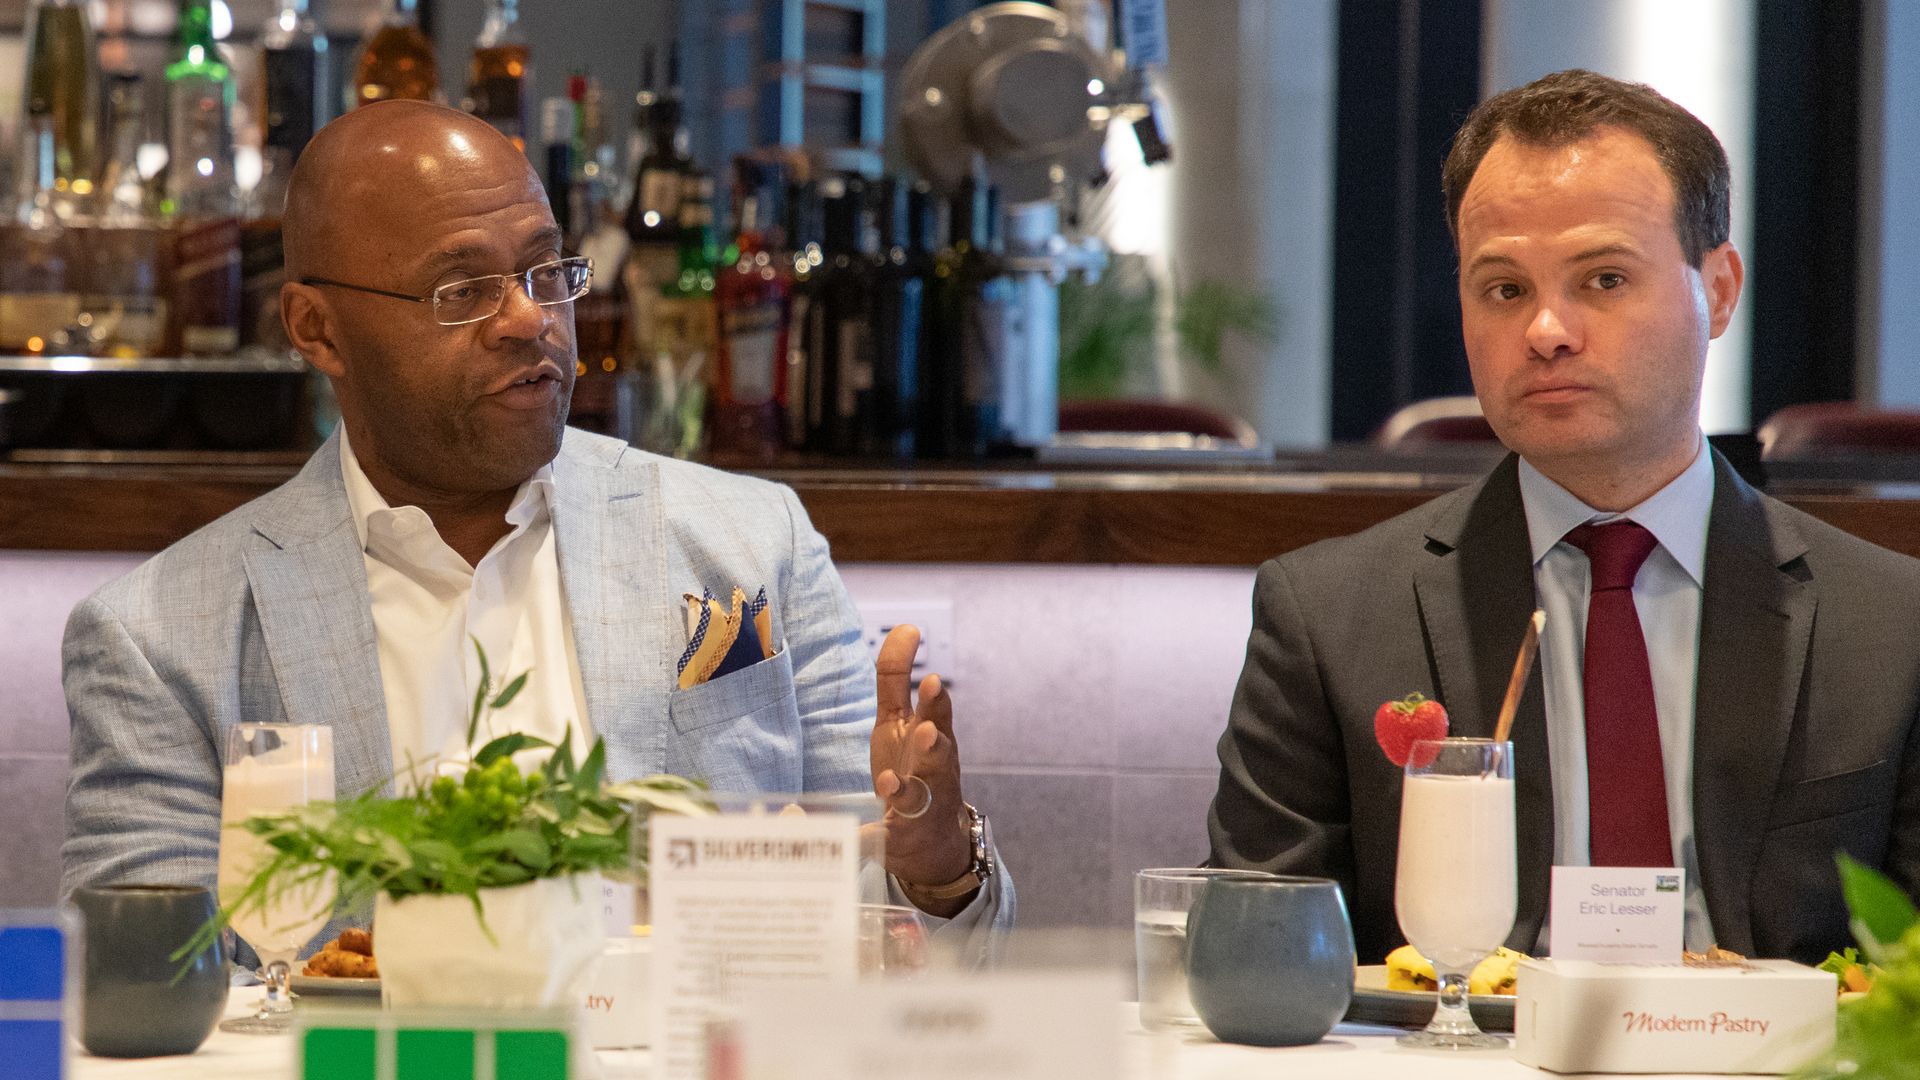 Mo Cowan, the former U.S. senator, sits at a table with other business and political leaders, discussing the Mass. startup ecosystem.